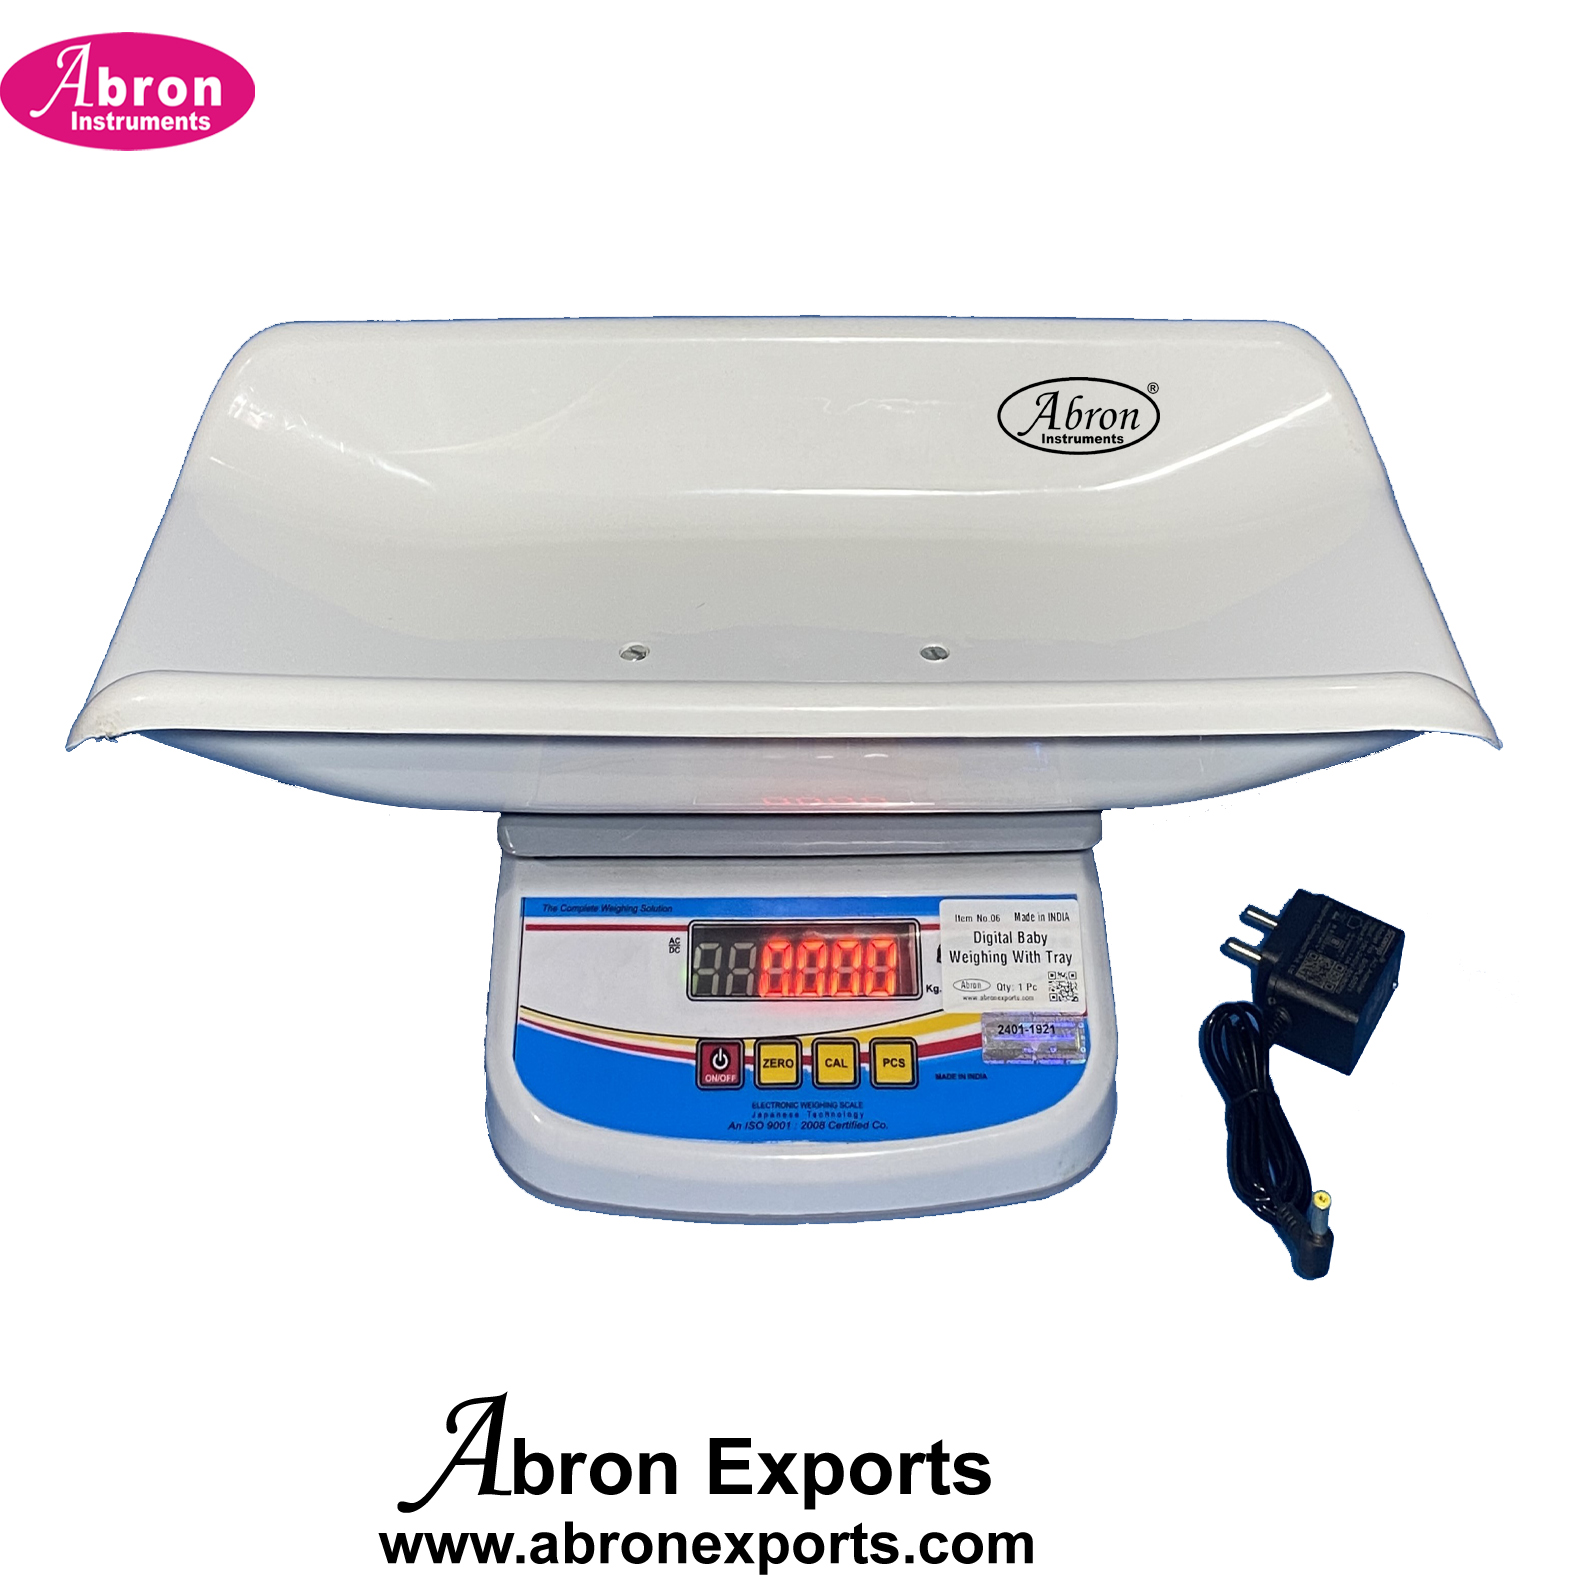 Baby Weighing Scale Digital LED 30kg 1gm Infant Tray Balance Weight Length New Born Cell Electric Abon ABM-3255BDL 